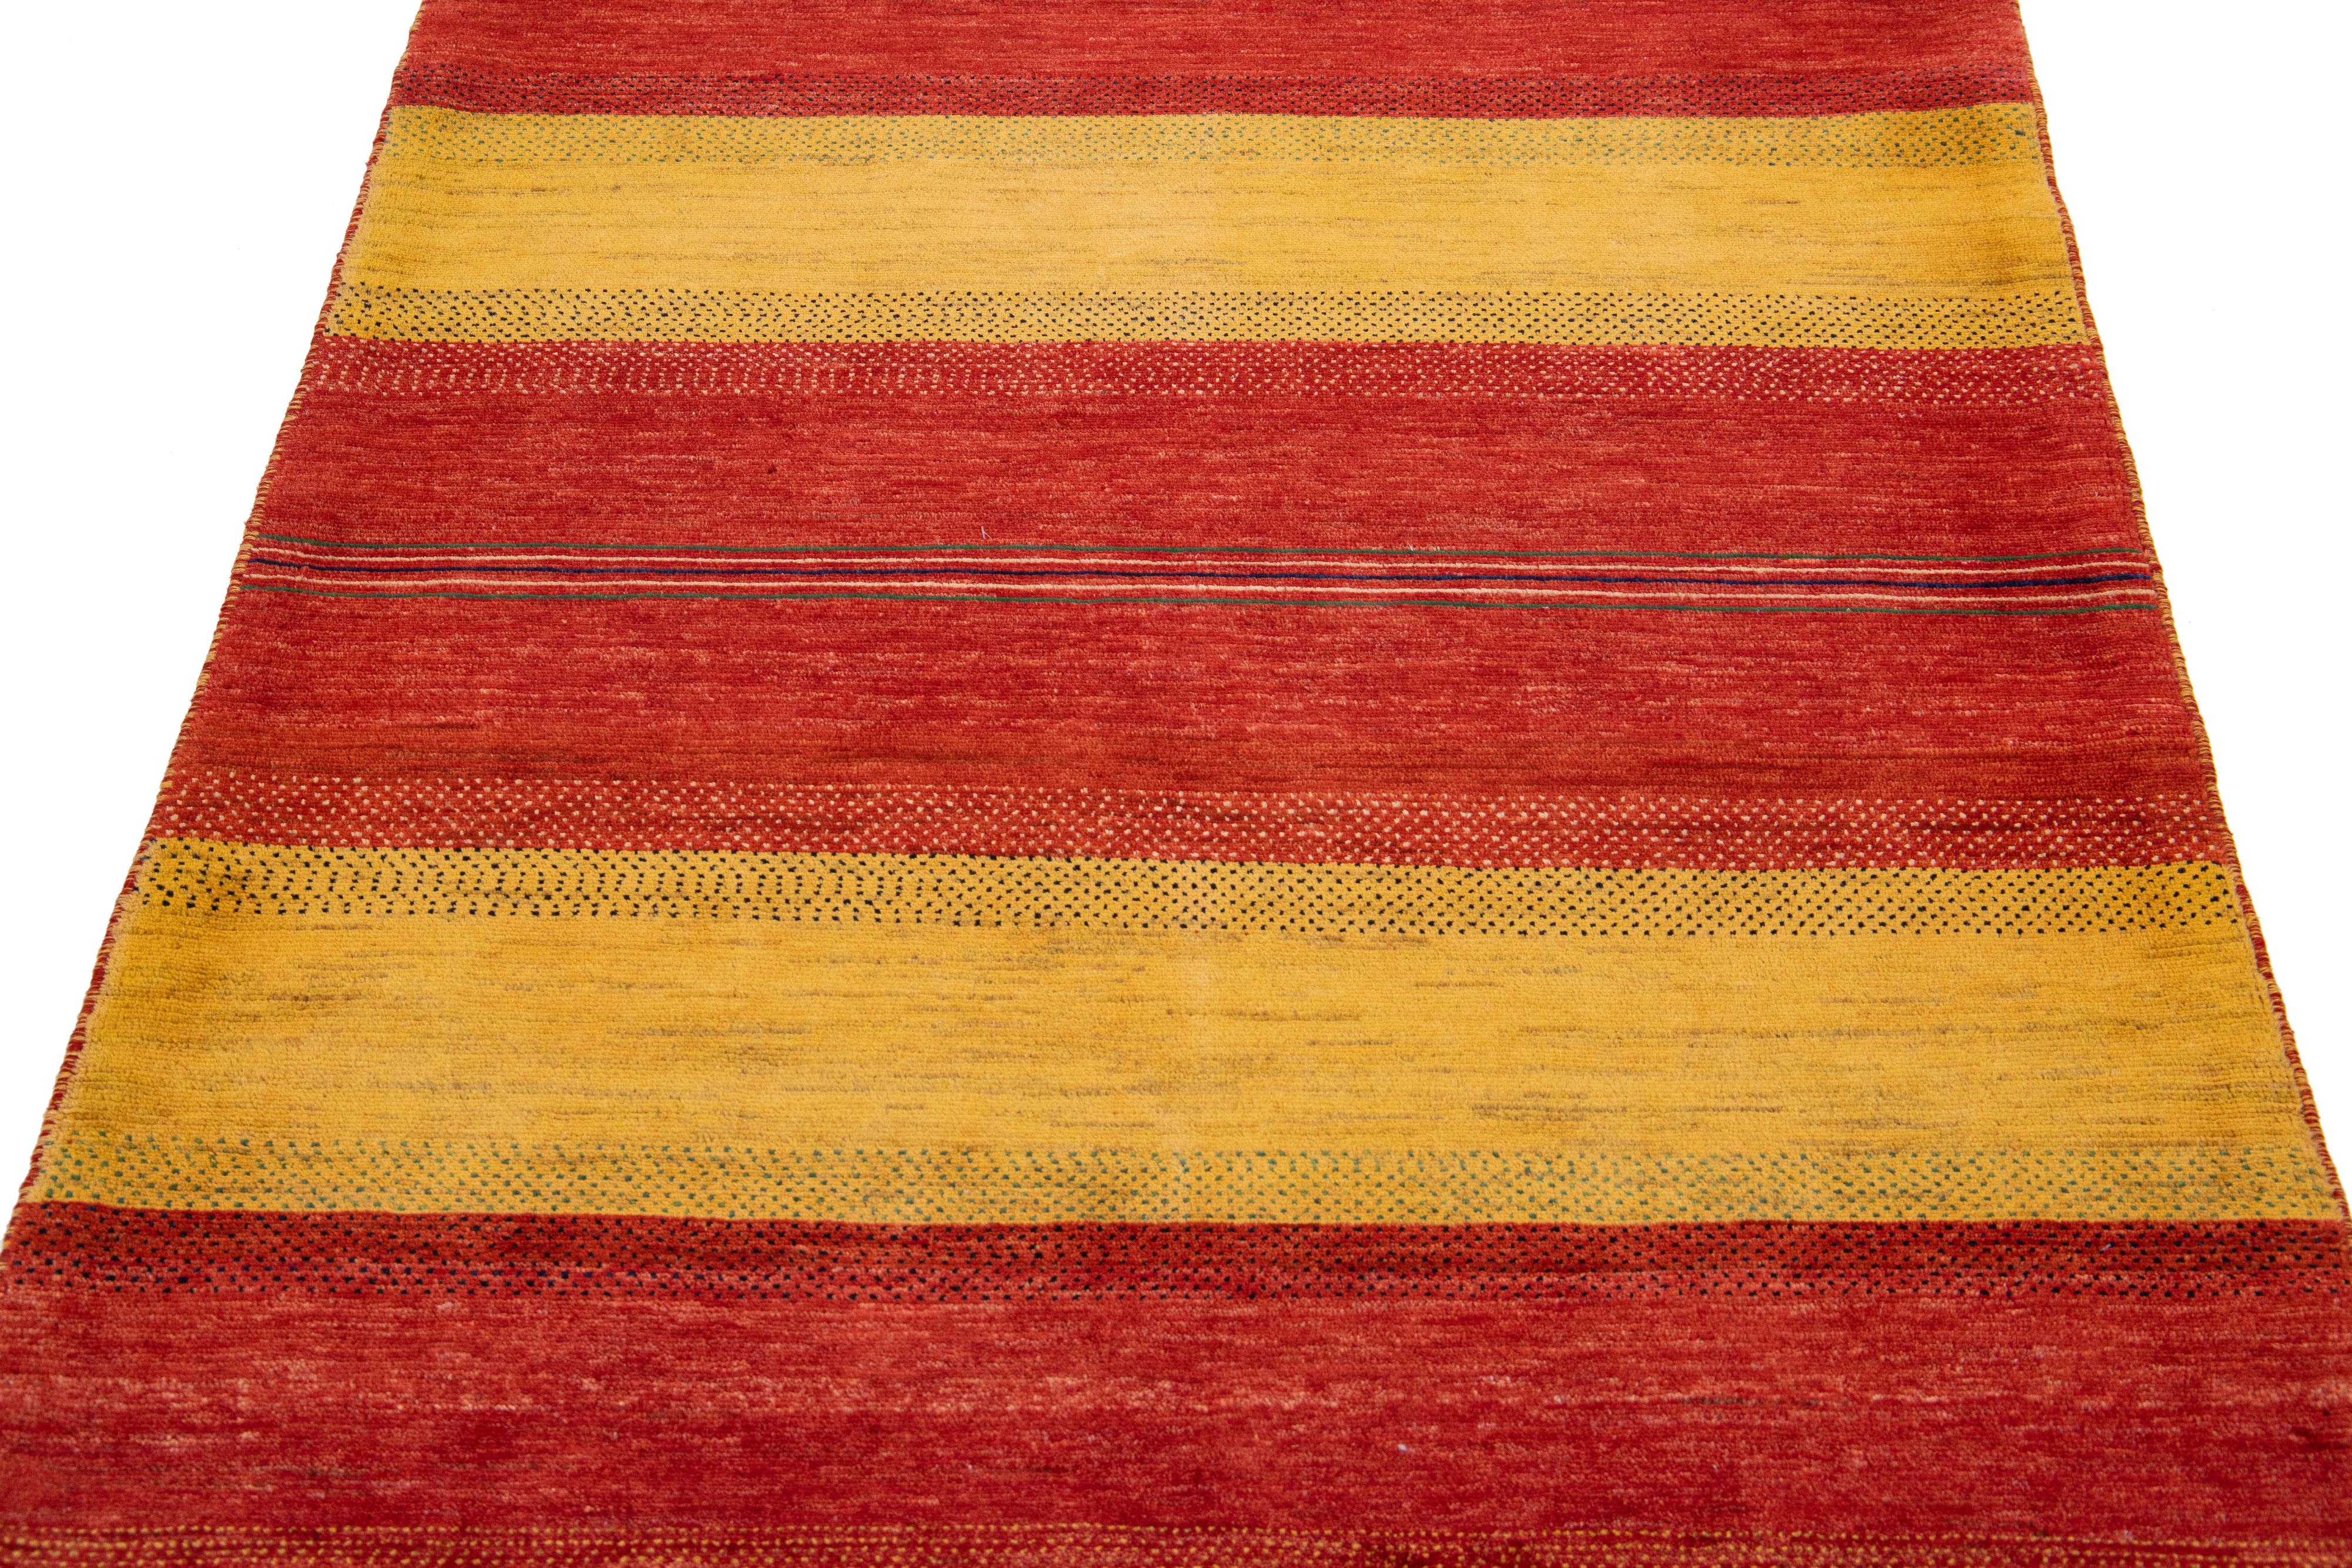 Beautiful modern Gabbeh-style hand-woven wool rug with a red color field. This Persian rug has a gorgeously minimalist design with blue and yellow accents.

This rug measures: 3'11